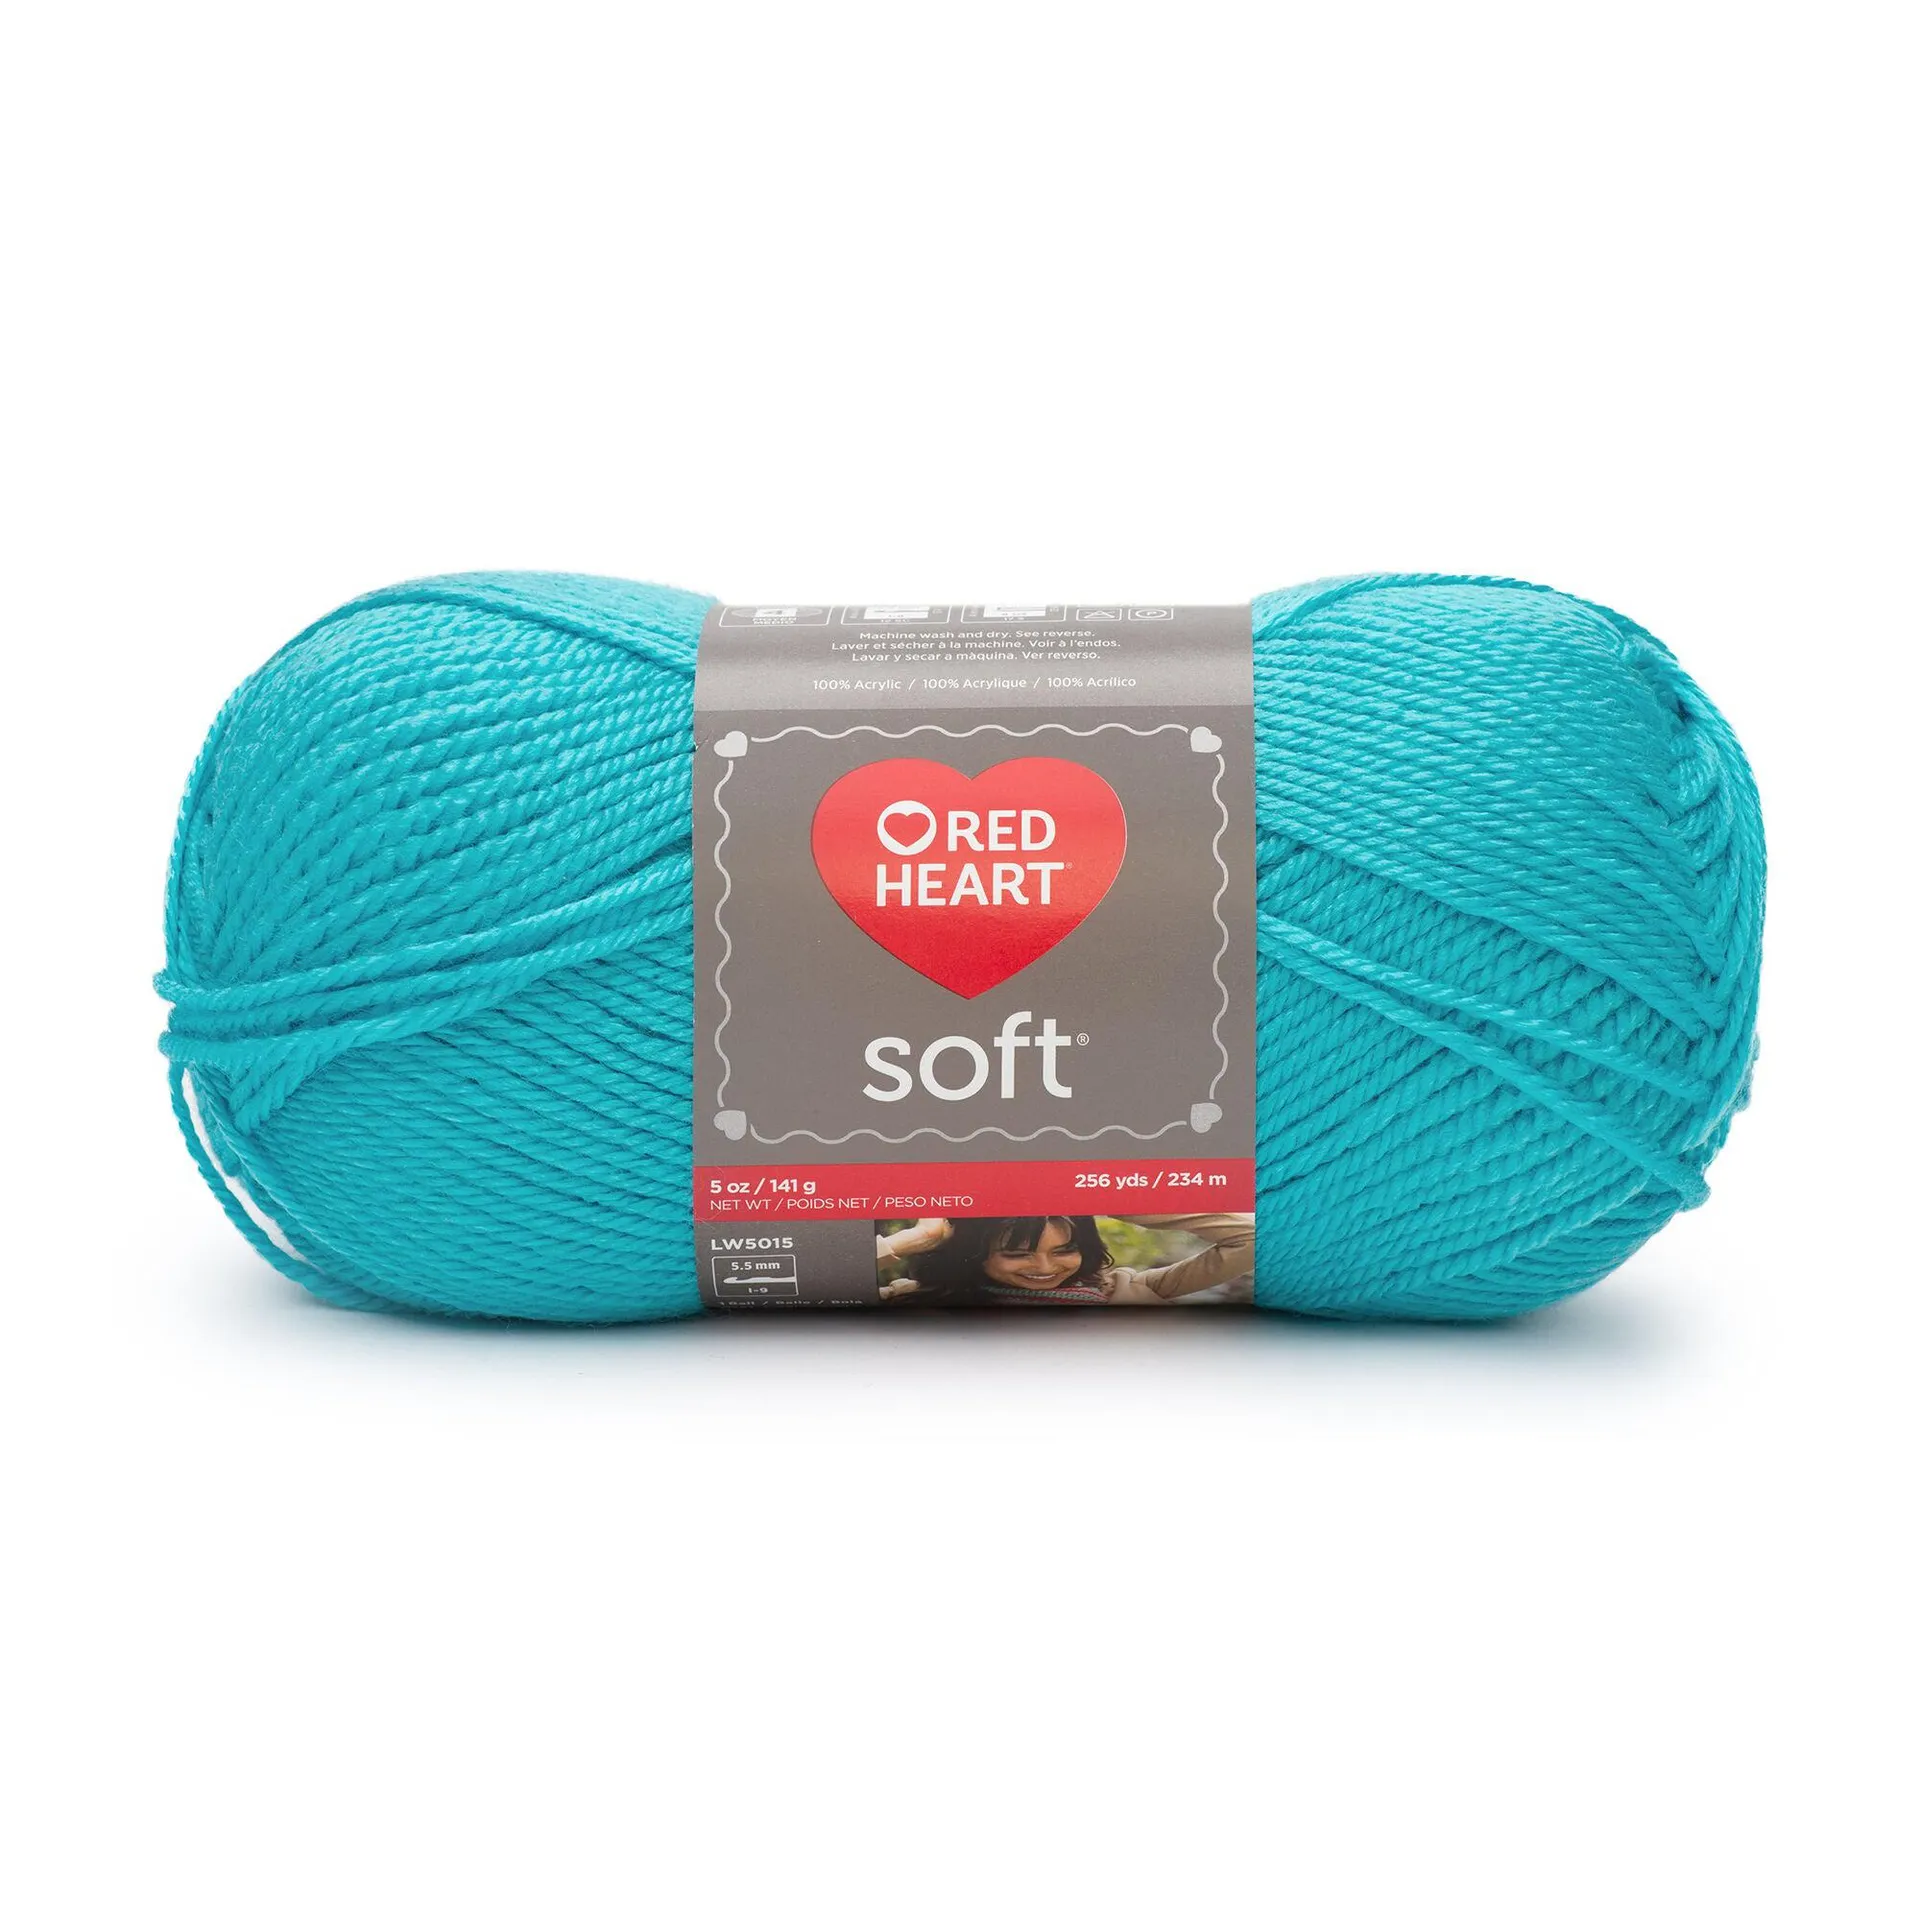 Soft - 113-141g - Red Heart